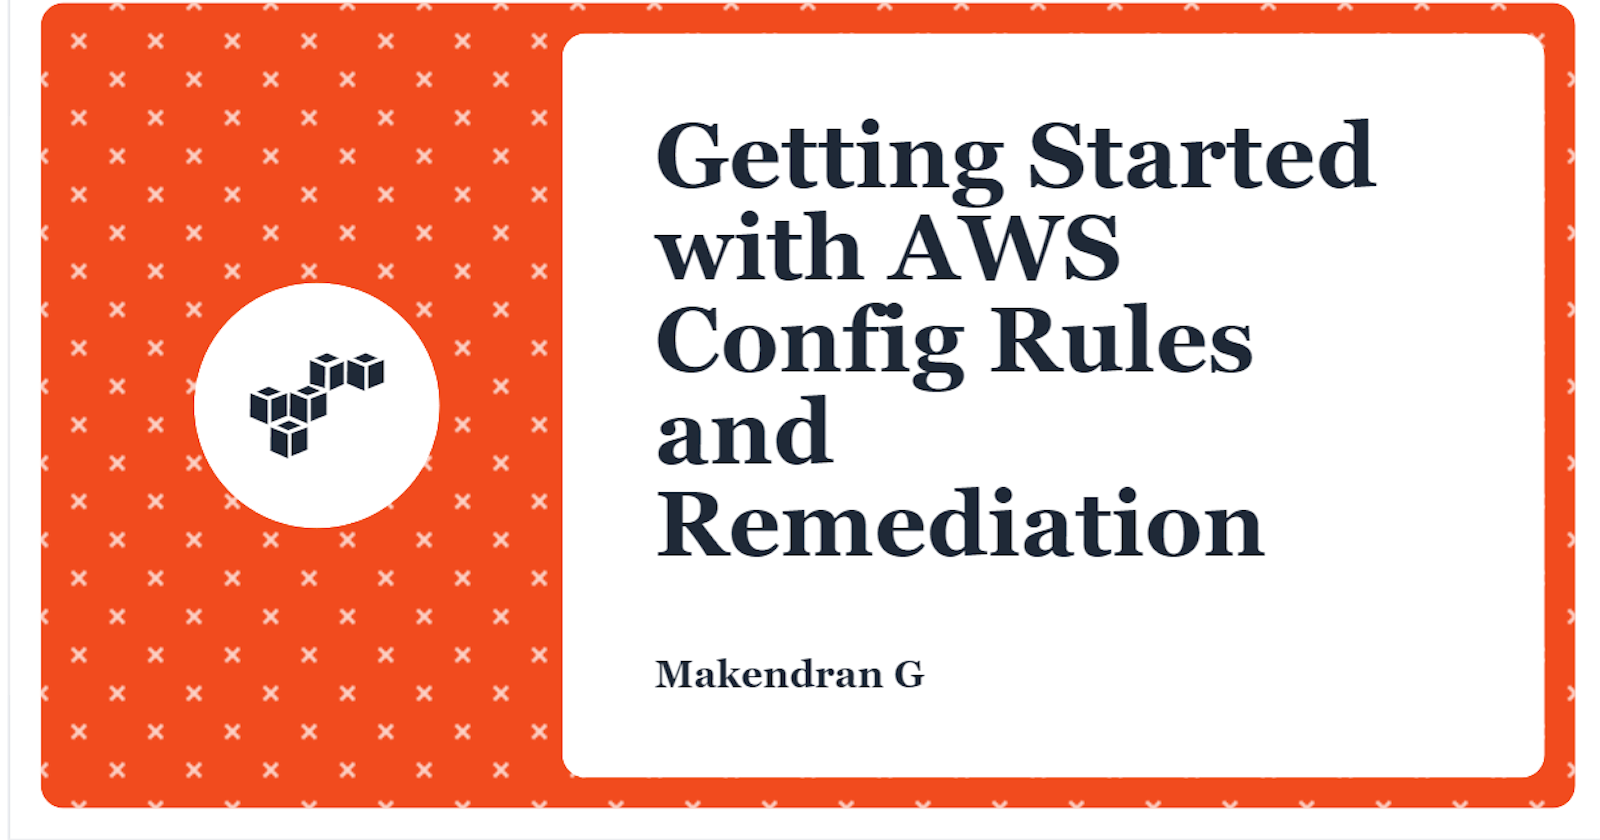 Getting Started with AWS Config Rules and Remediation